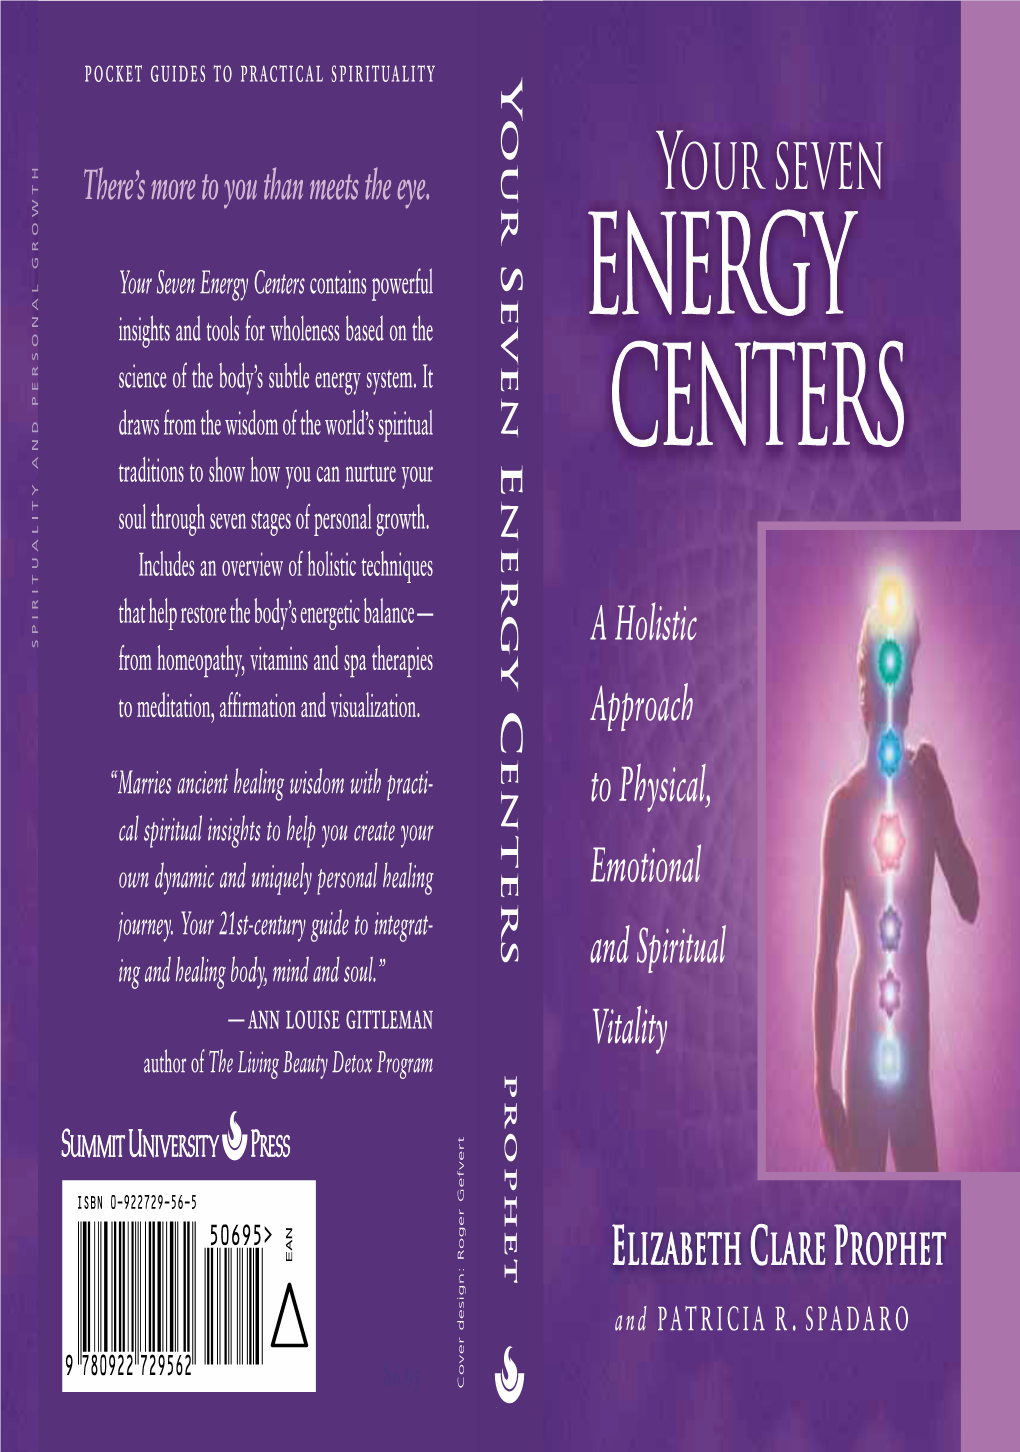 Your Seven Energy Centers Contains Powerful EVEN ENERGY Insights and Tools for Wholeness Based on the Science of the Body’S Subtle Energy System